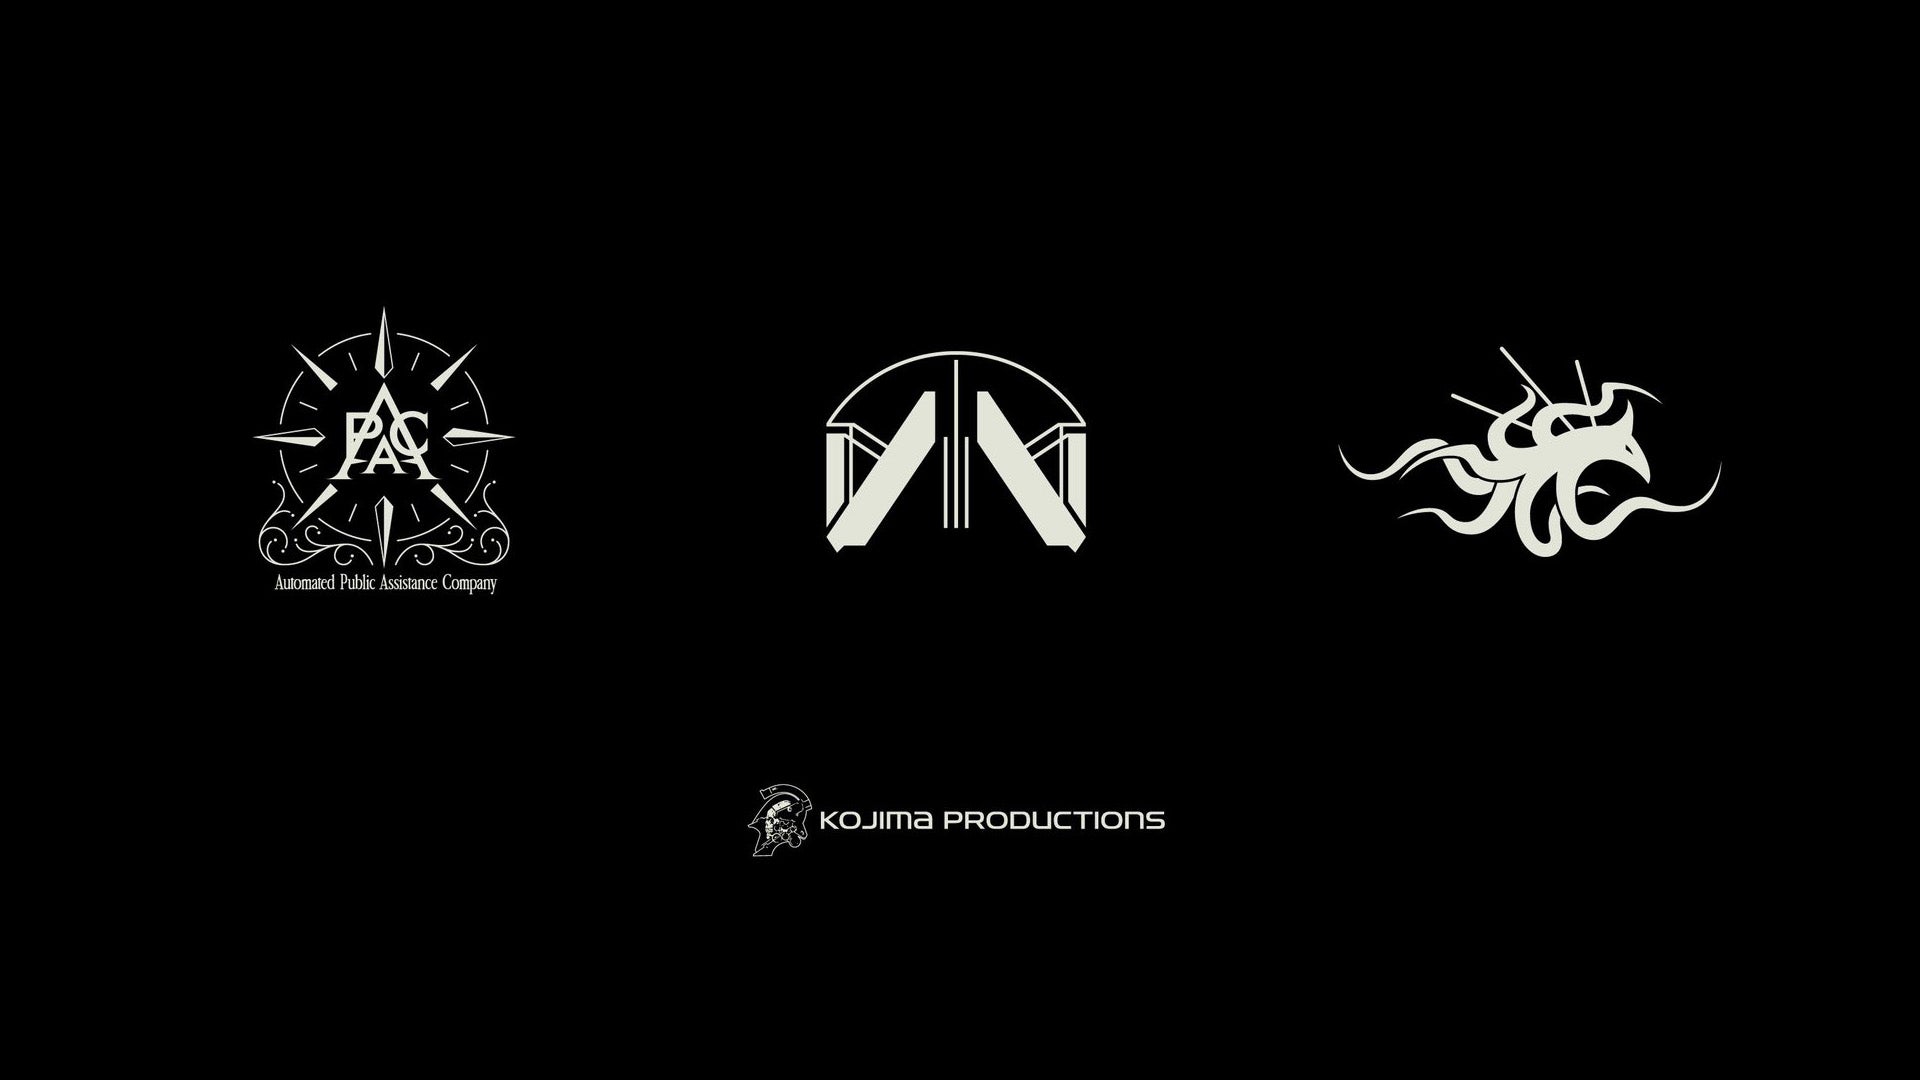 Hideo Kojima can't help but tease his next game, this time with fancy logos | VG247